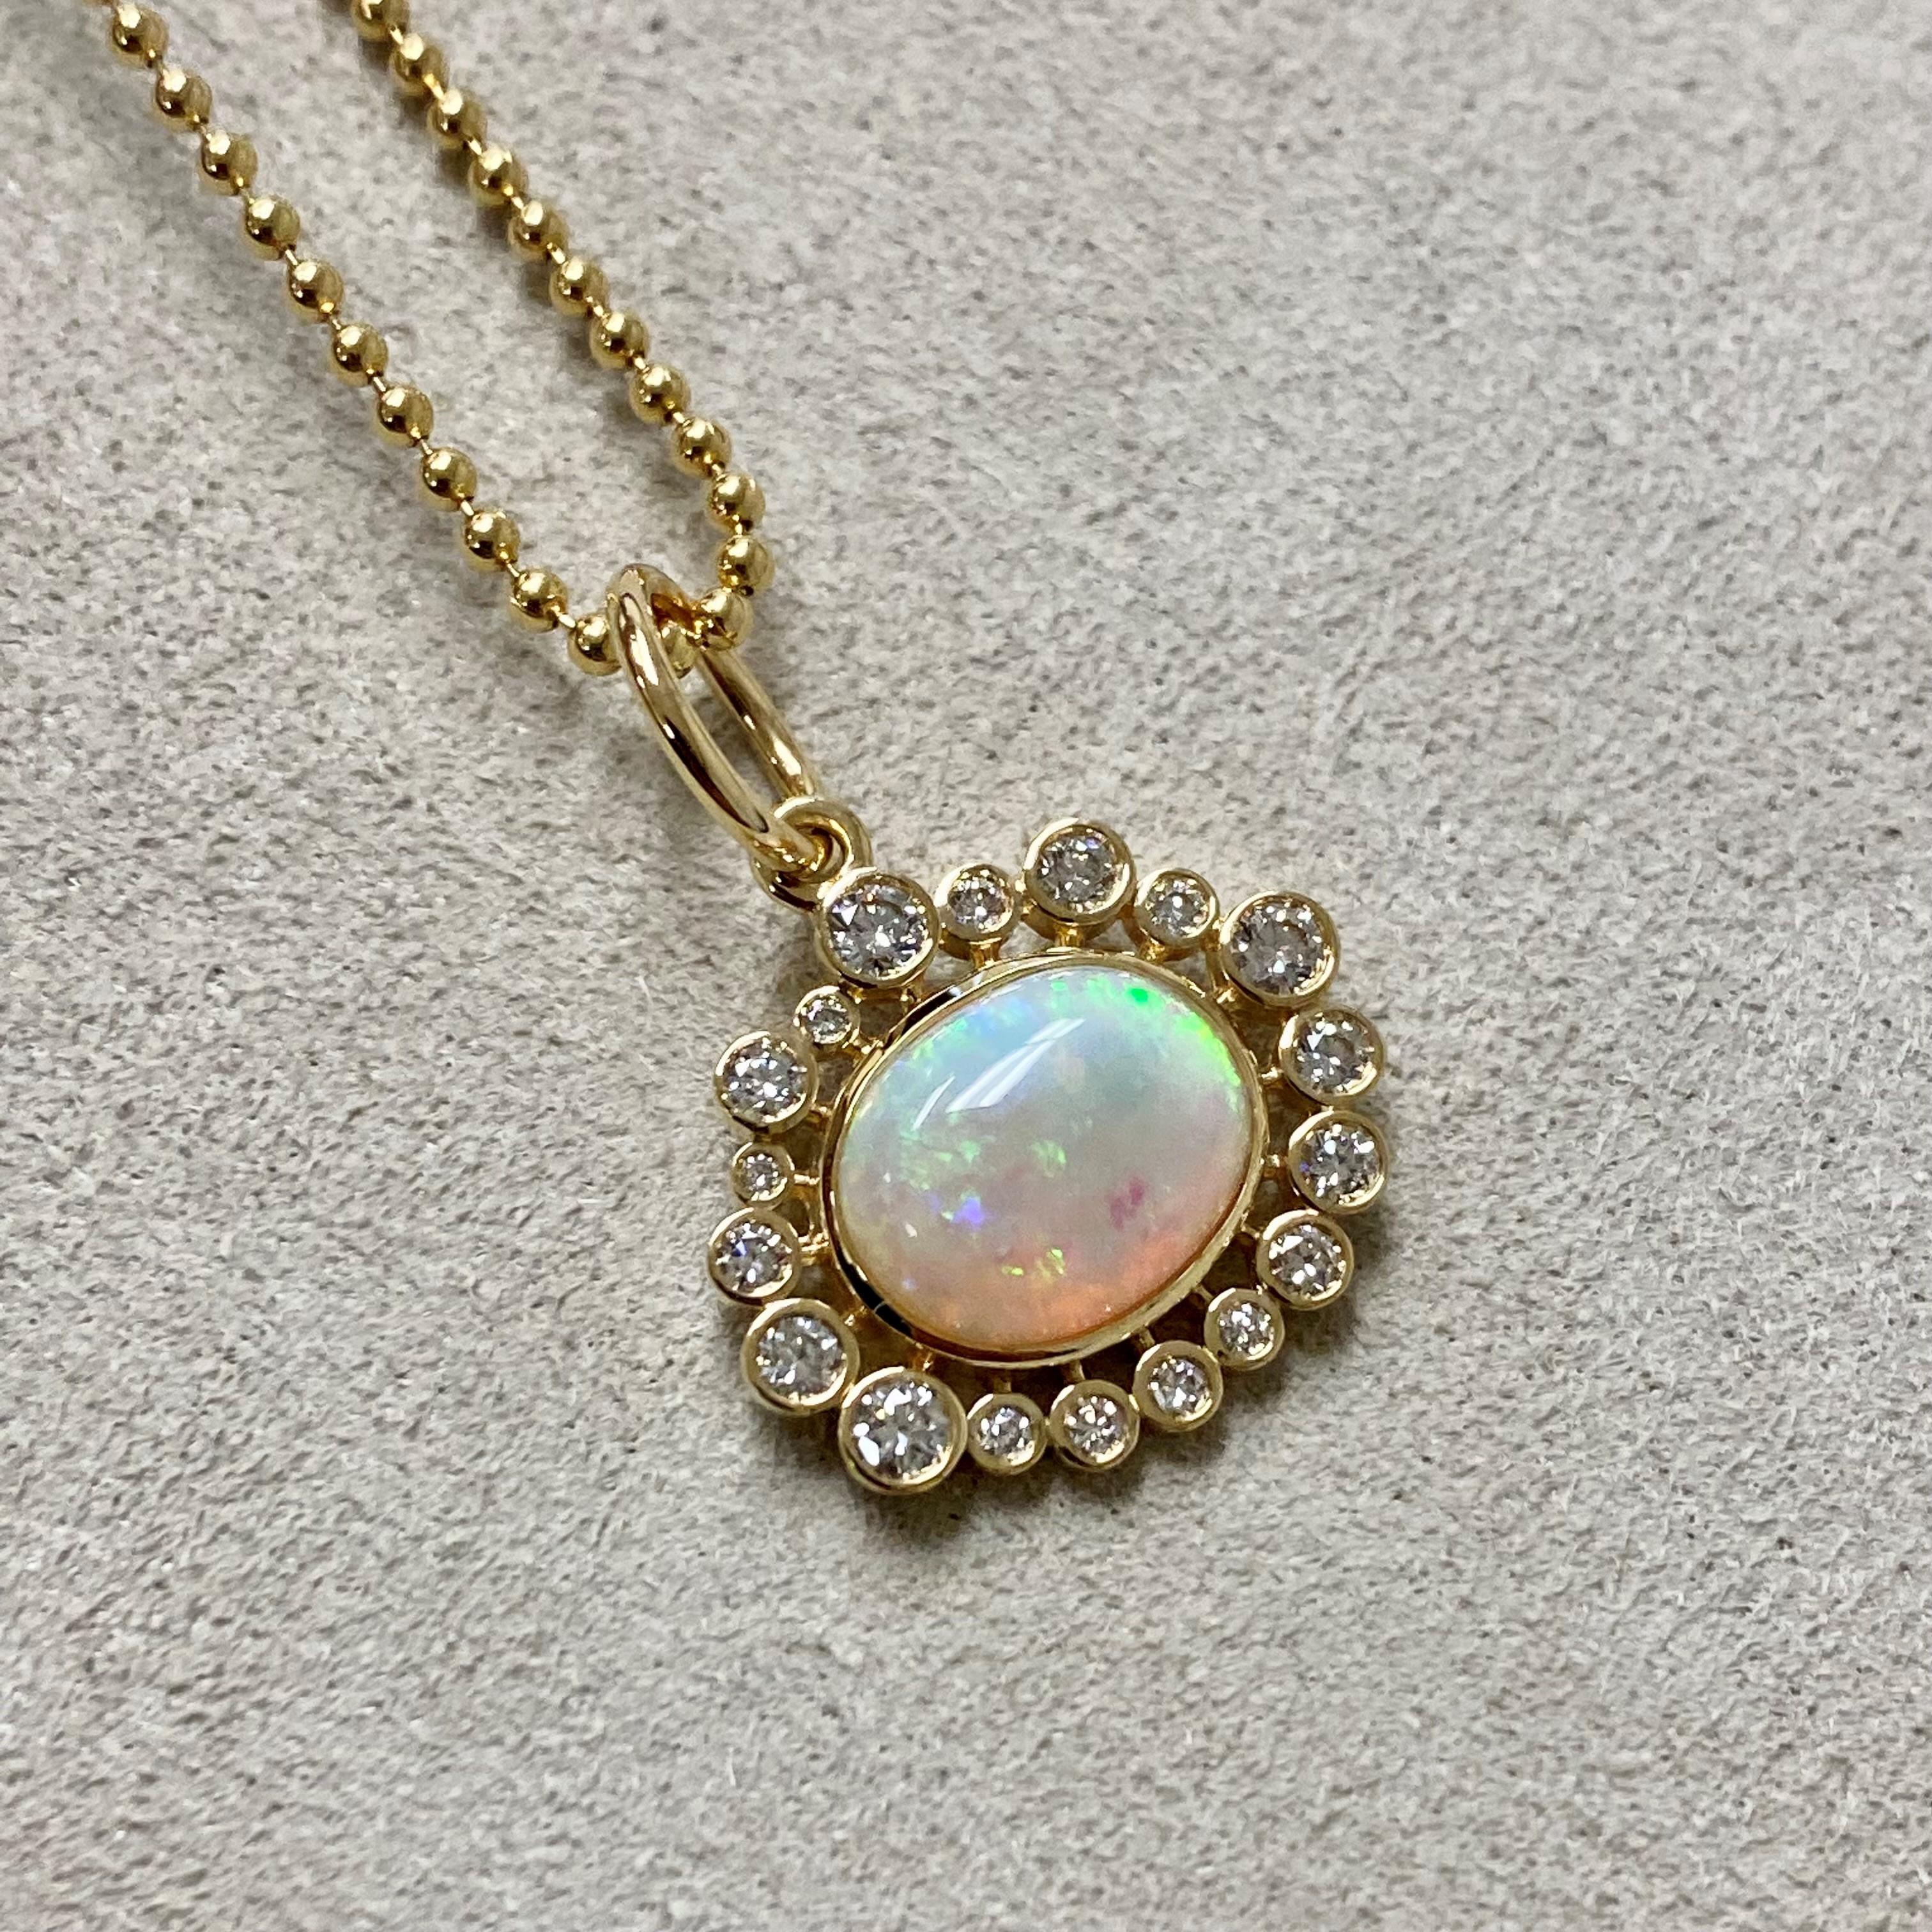 Created in 18 karat yellow gold
Ethiopian opal 1.50 carats approx.
Diamonds 0.40 carat approx.
18 inch necklace with loops at 16th and 17th inch
Lobster clasp

About the Designers ~ Dharmesh & Namrata

Drawing inspiration from little things,